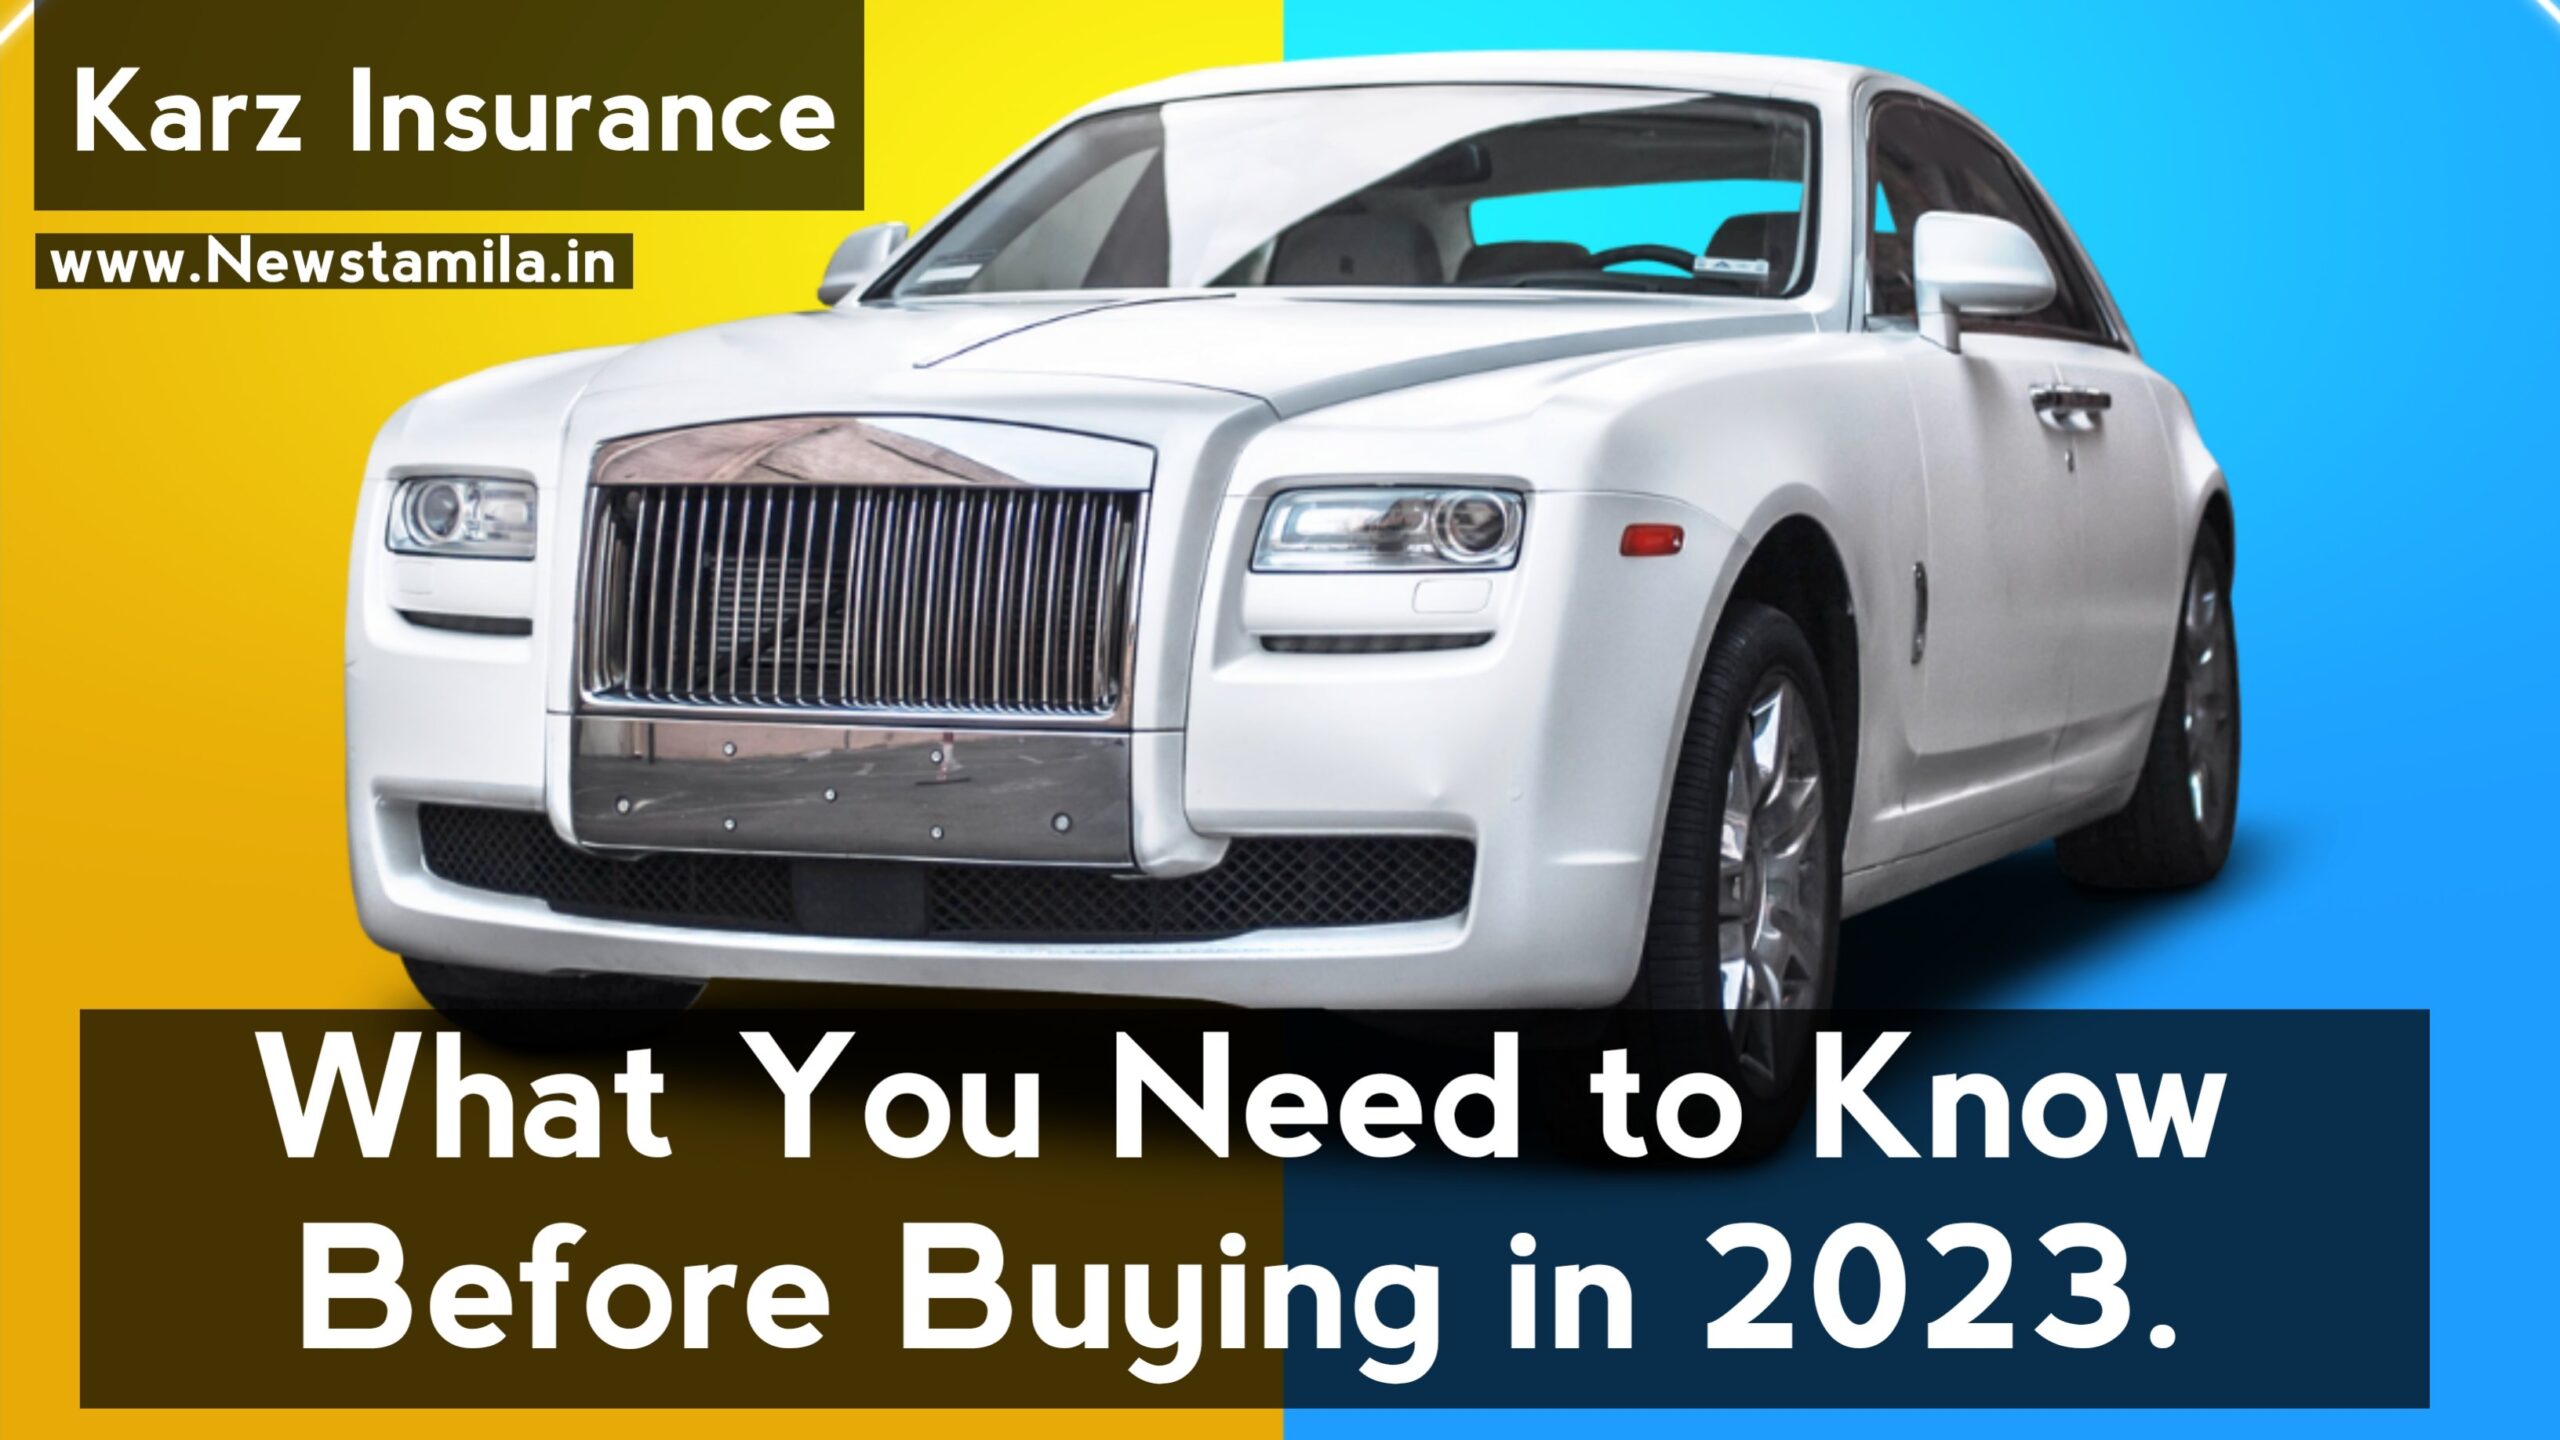 Karz Insurance: What You Need to Know Before Buying